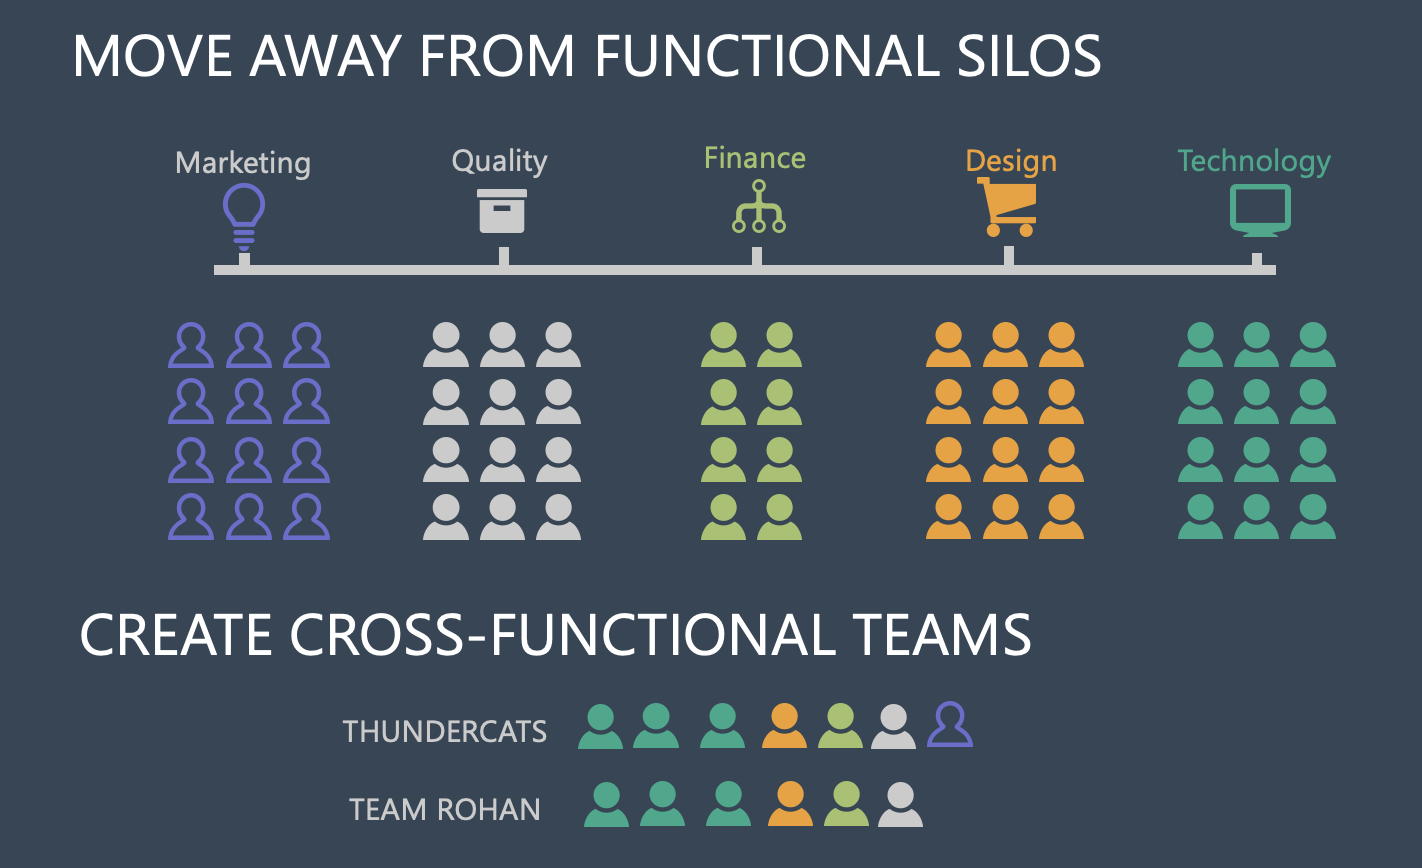 Functional Silos and Cross-functional teams